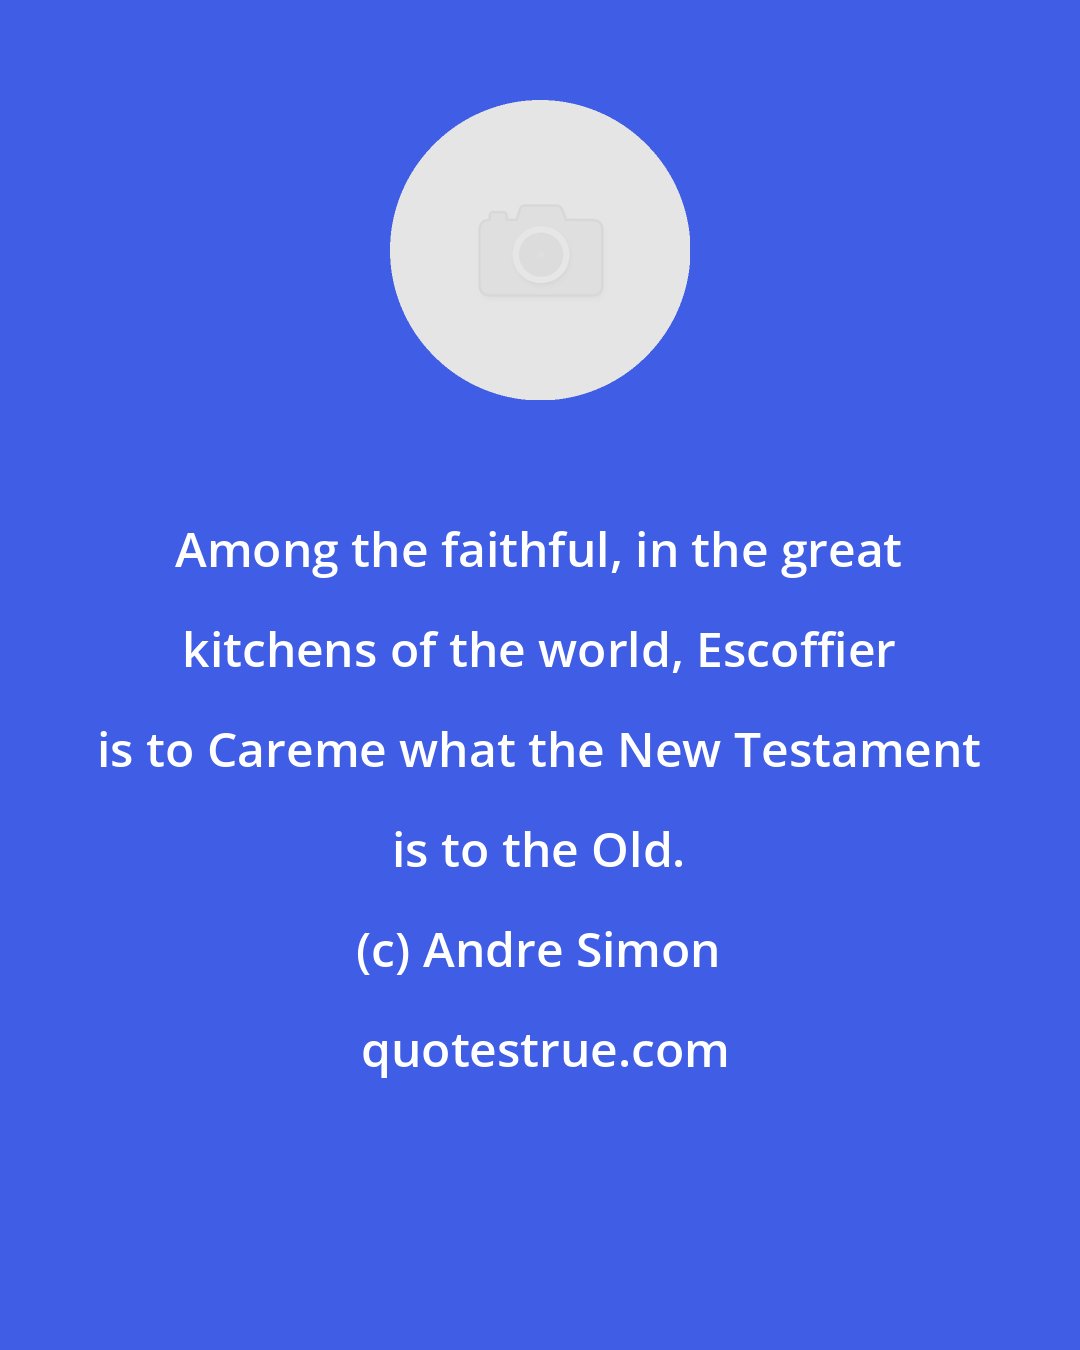 Andre Simon: Among the faithful, in the great kitchens of the world, Escoffier is to Careme what the New Testament is to the Old.